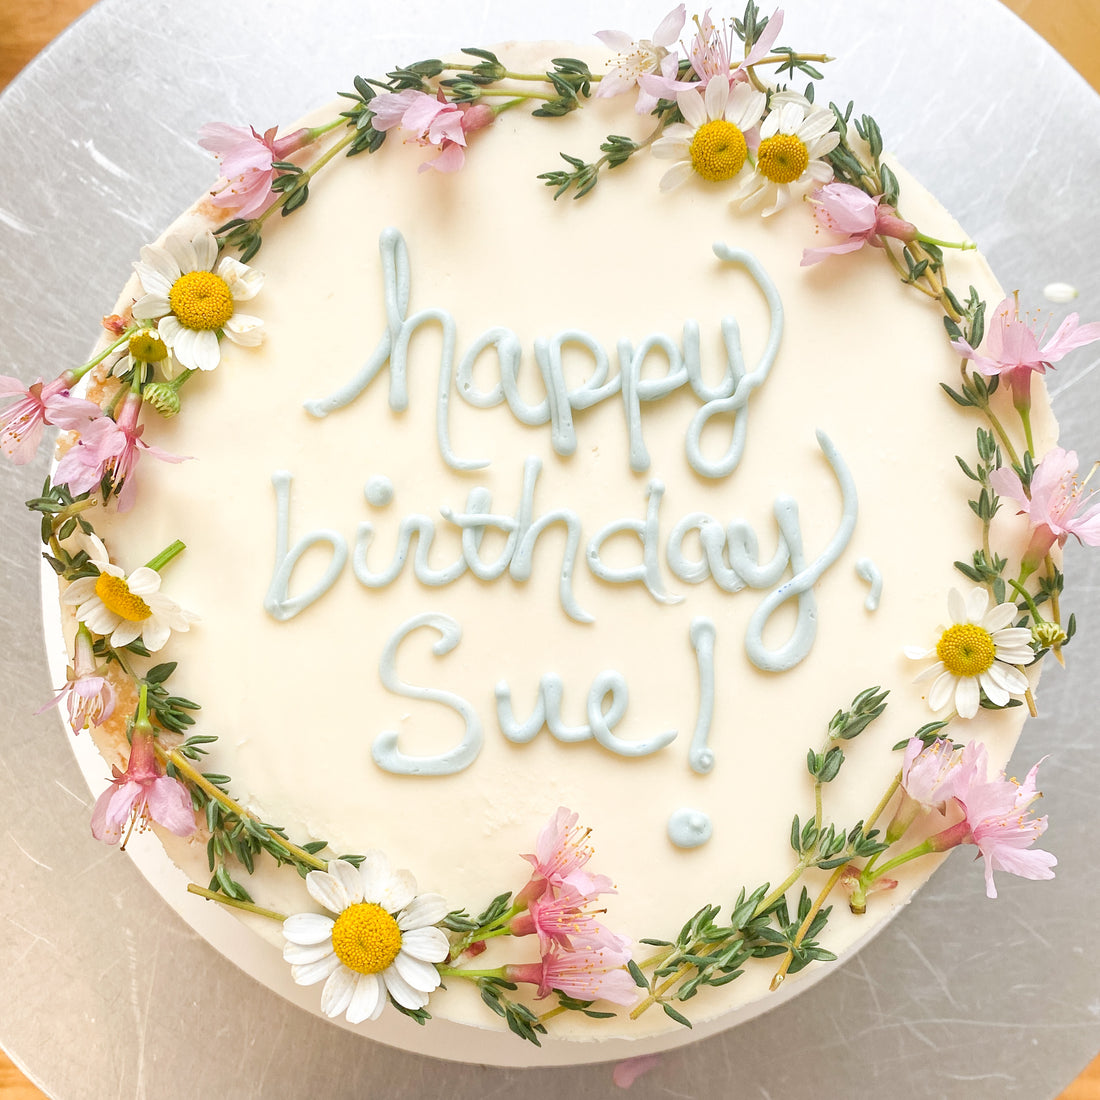 Top-down view of a round cake decorated with a flower crown and the words "happy birthday Sue!" in blue cursive piping.